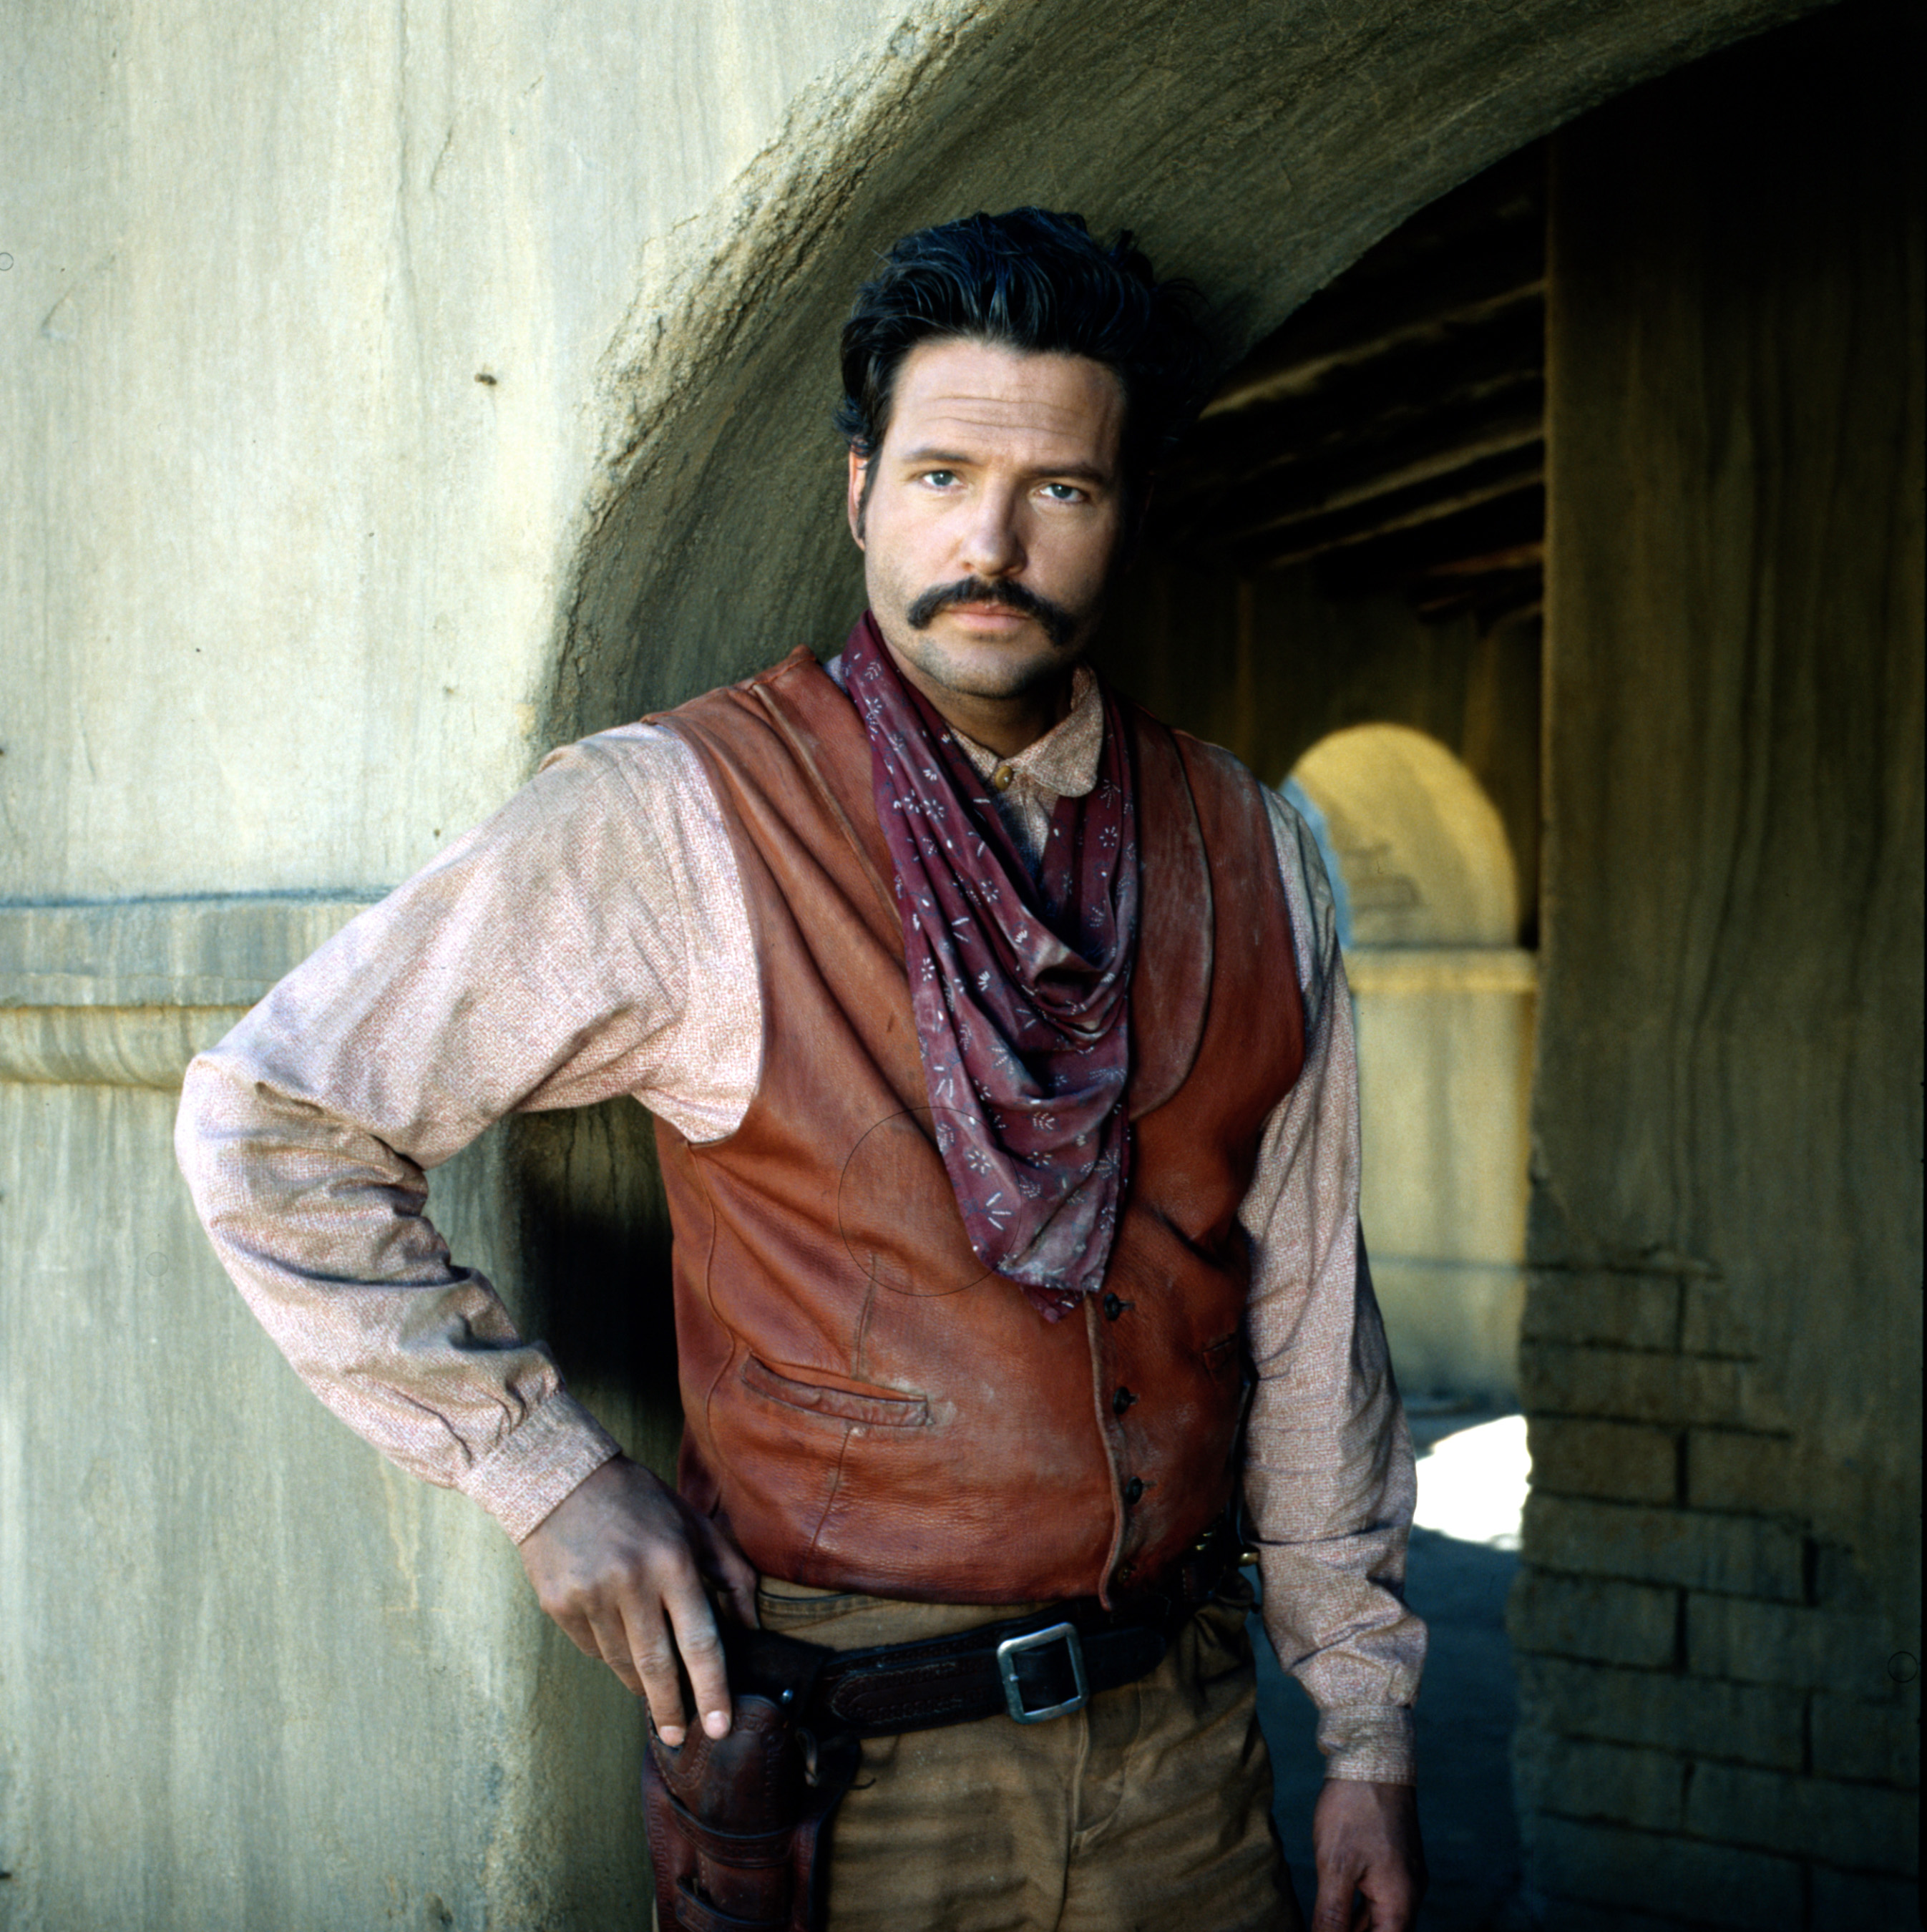 Dale MIdkiff as Magnificent 7's Buck Wilmington